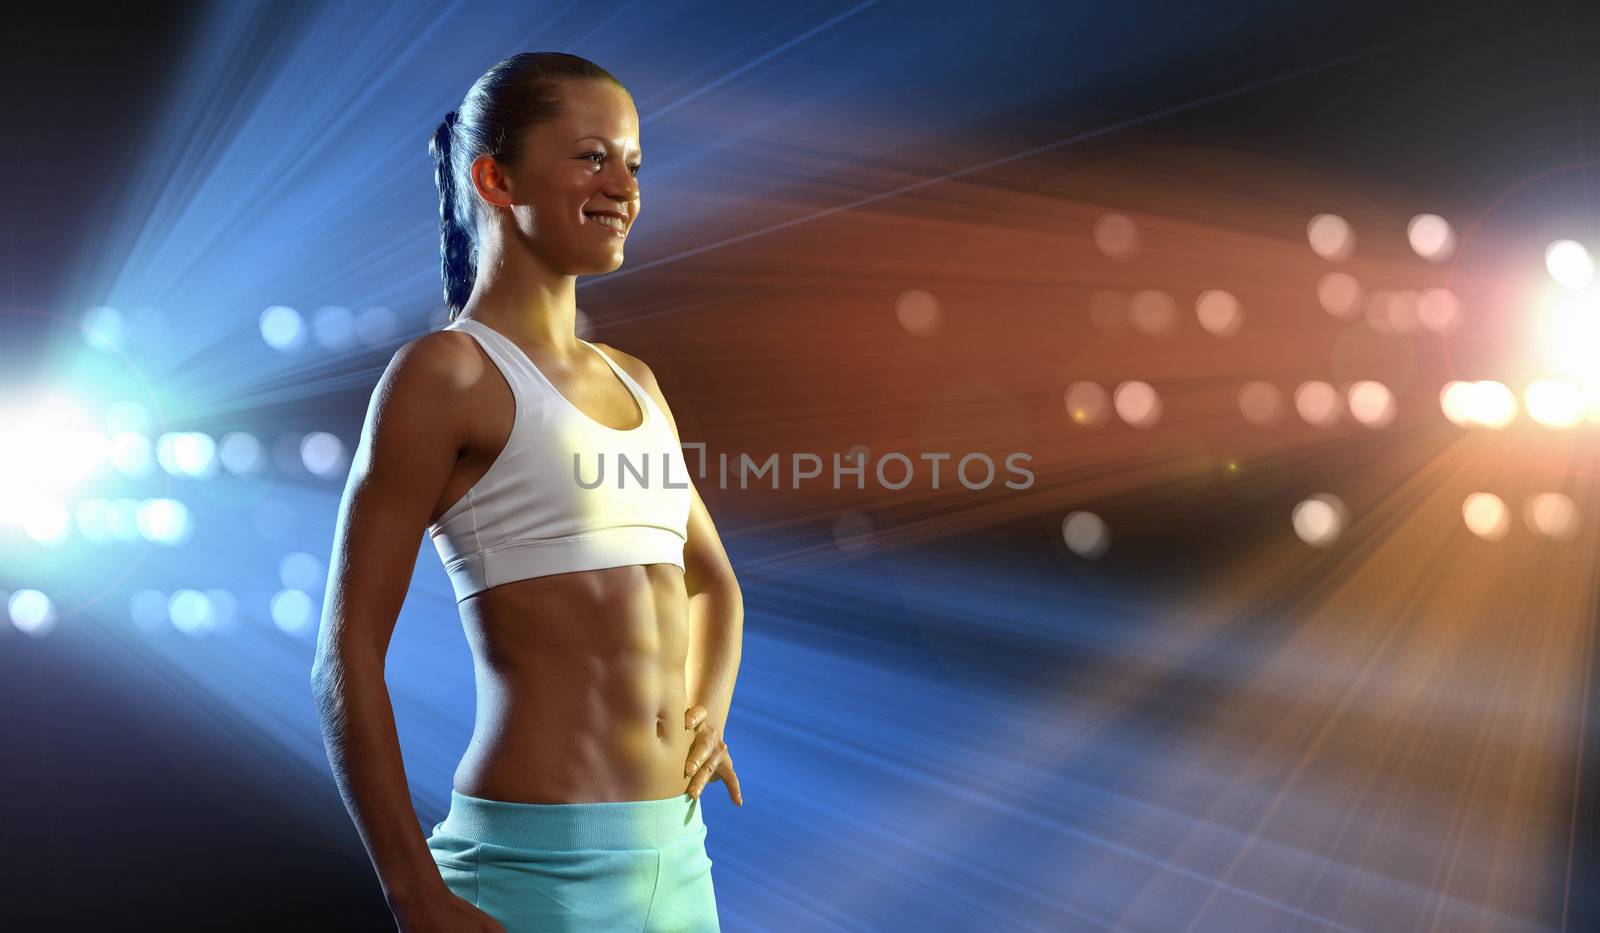 Fitness woman by sergey_nivens